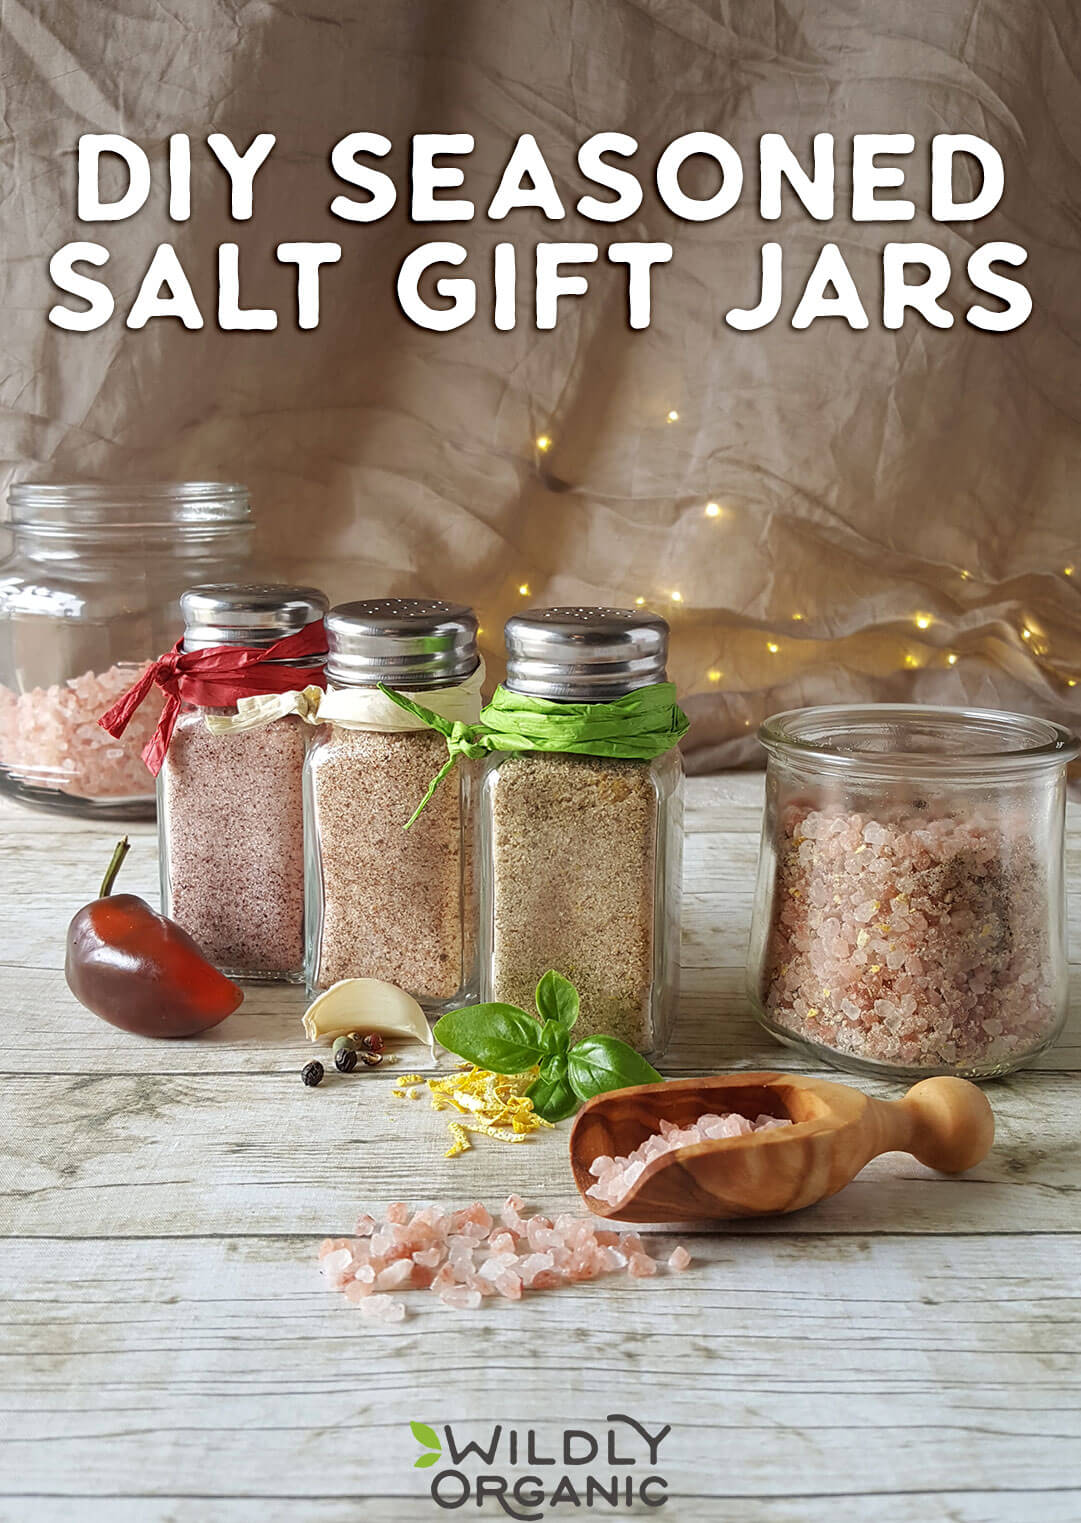 Photo of four salt shakers filled with different seasoned salts